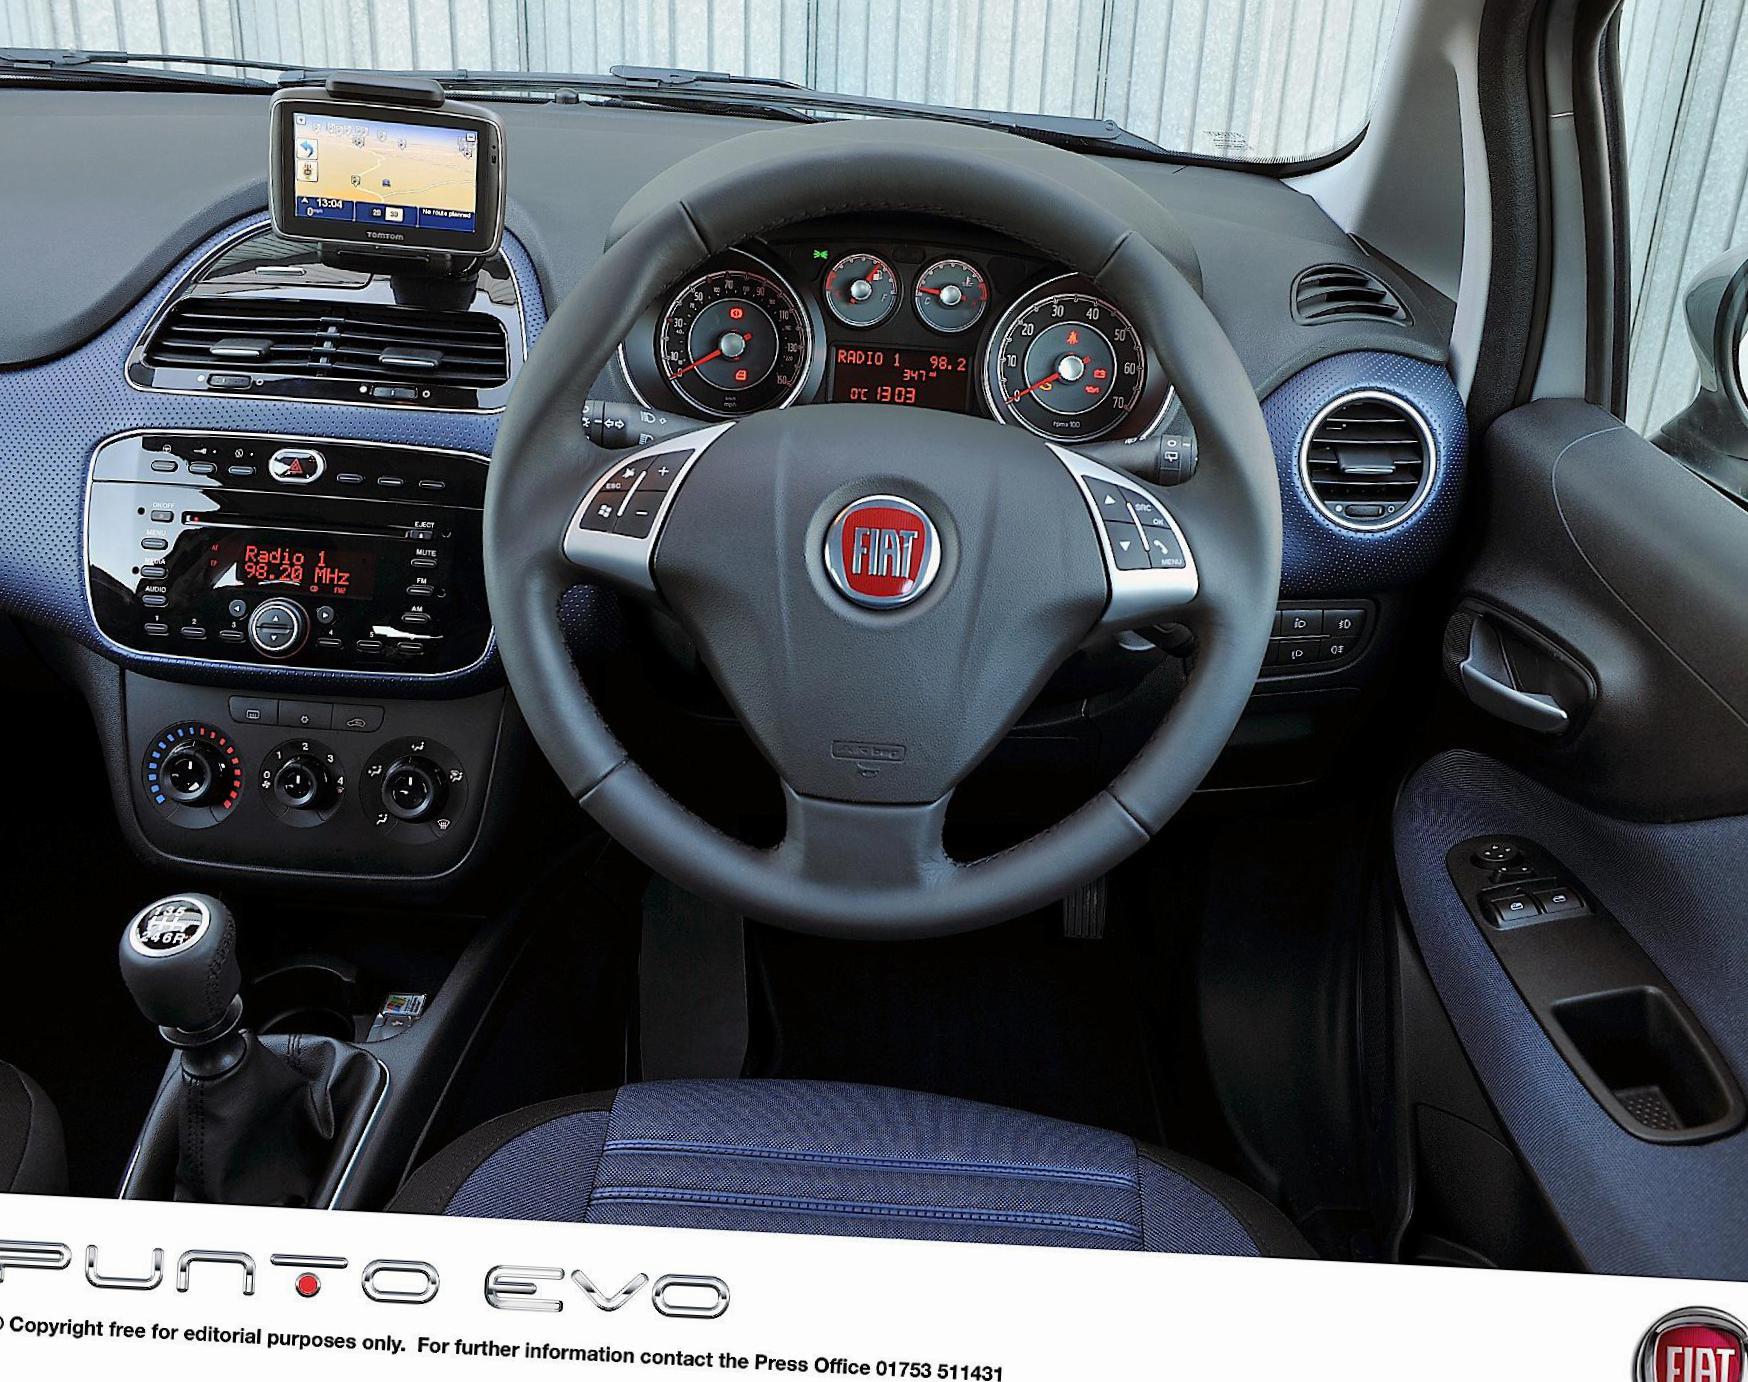 Punto Evo 3 doors Fiat approved 2009